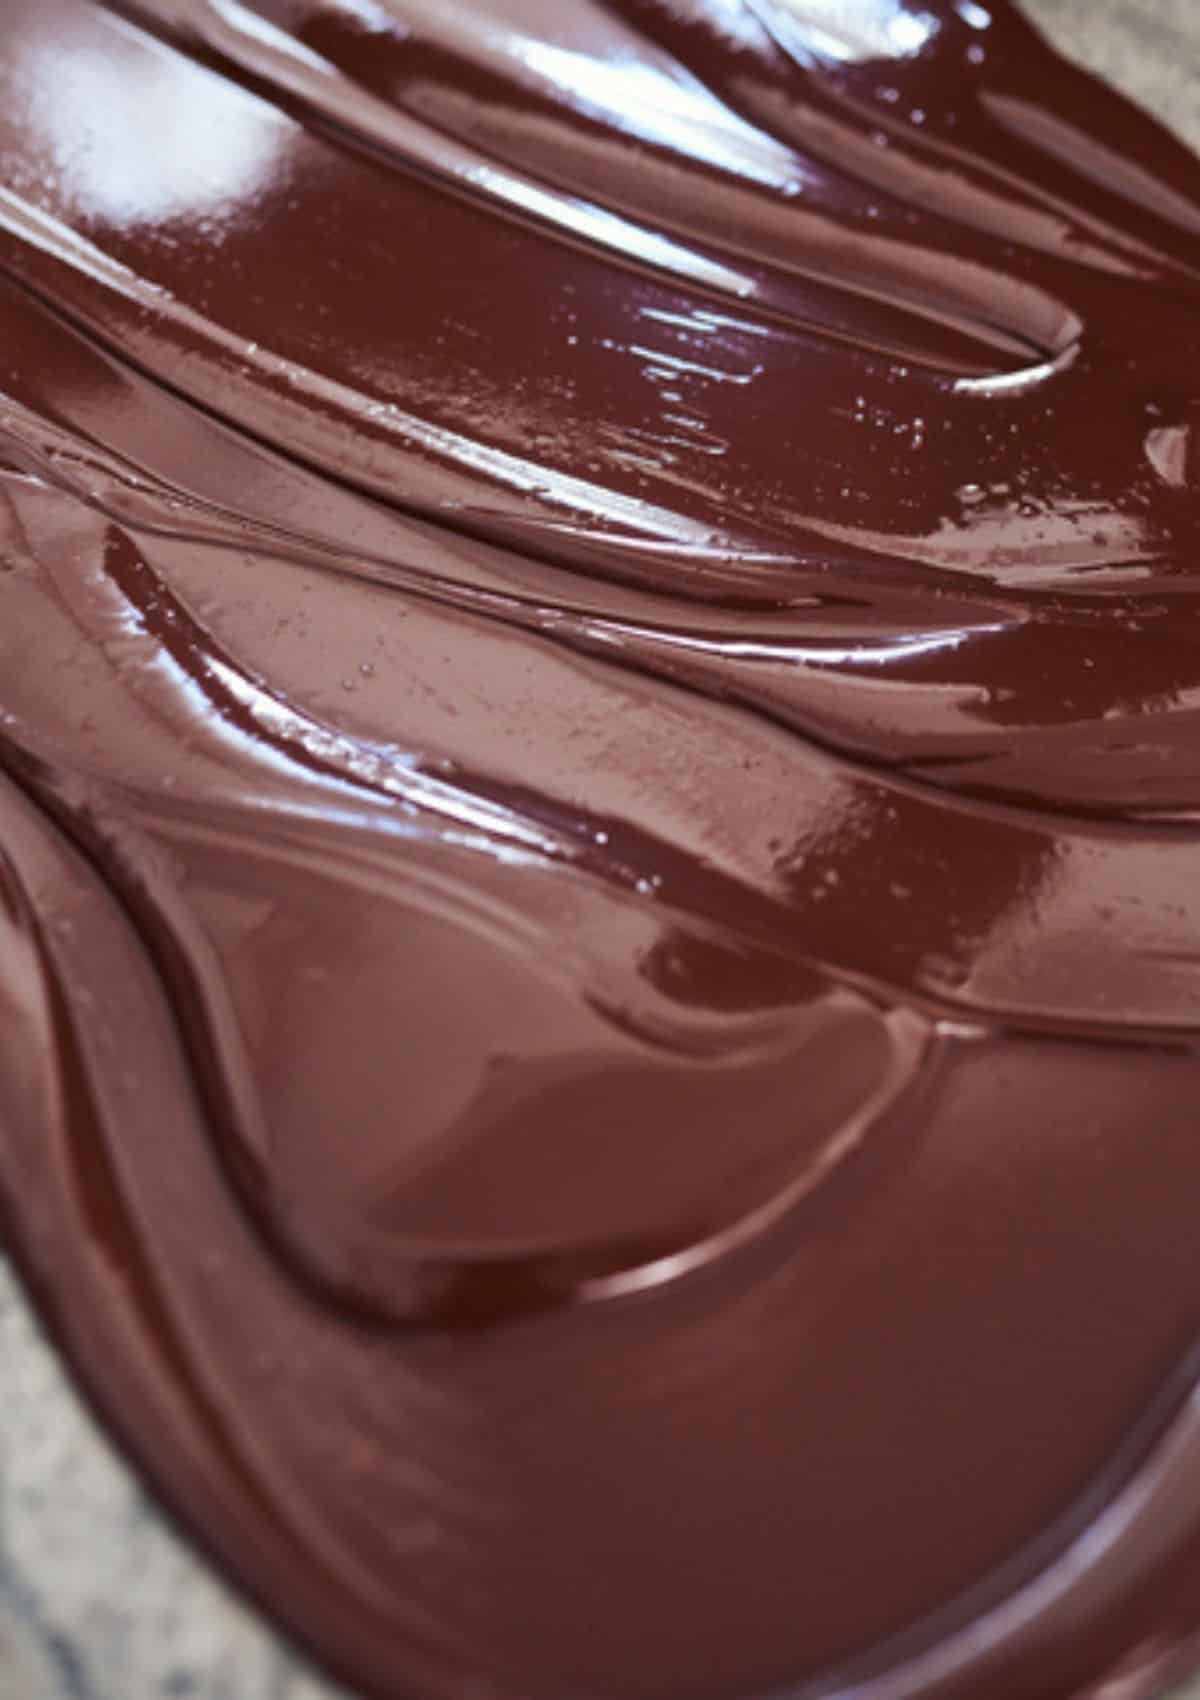 melted milk chocolate.